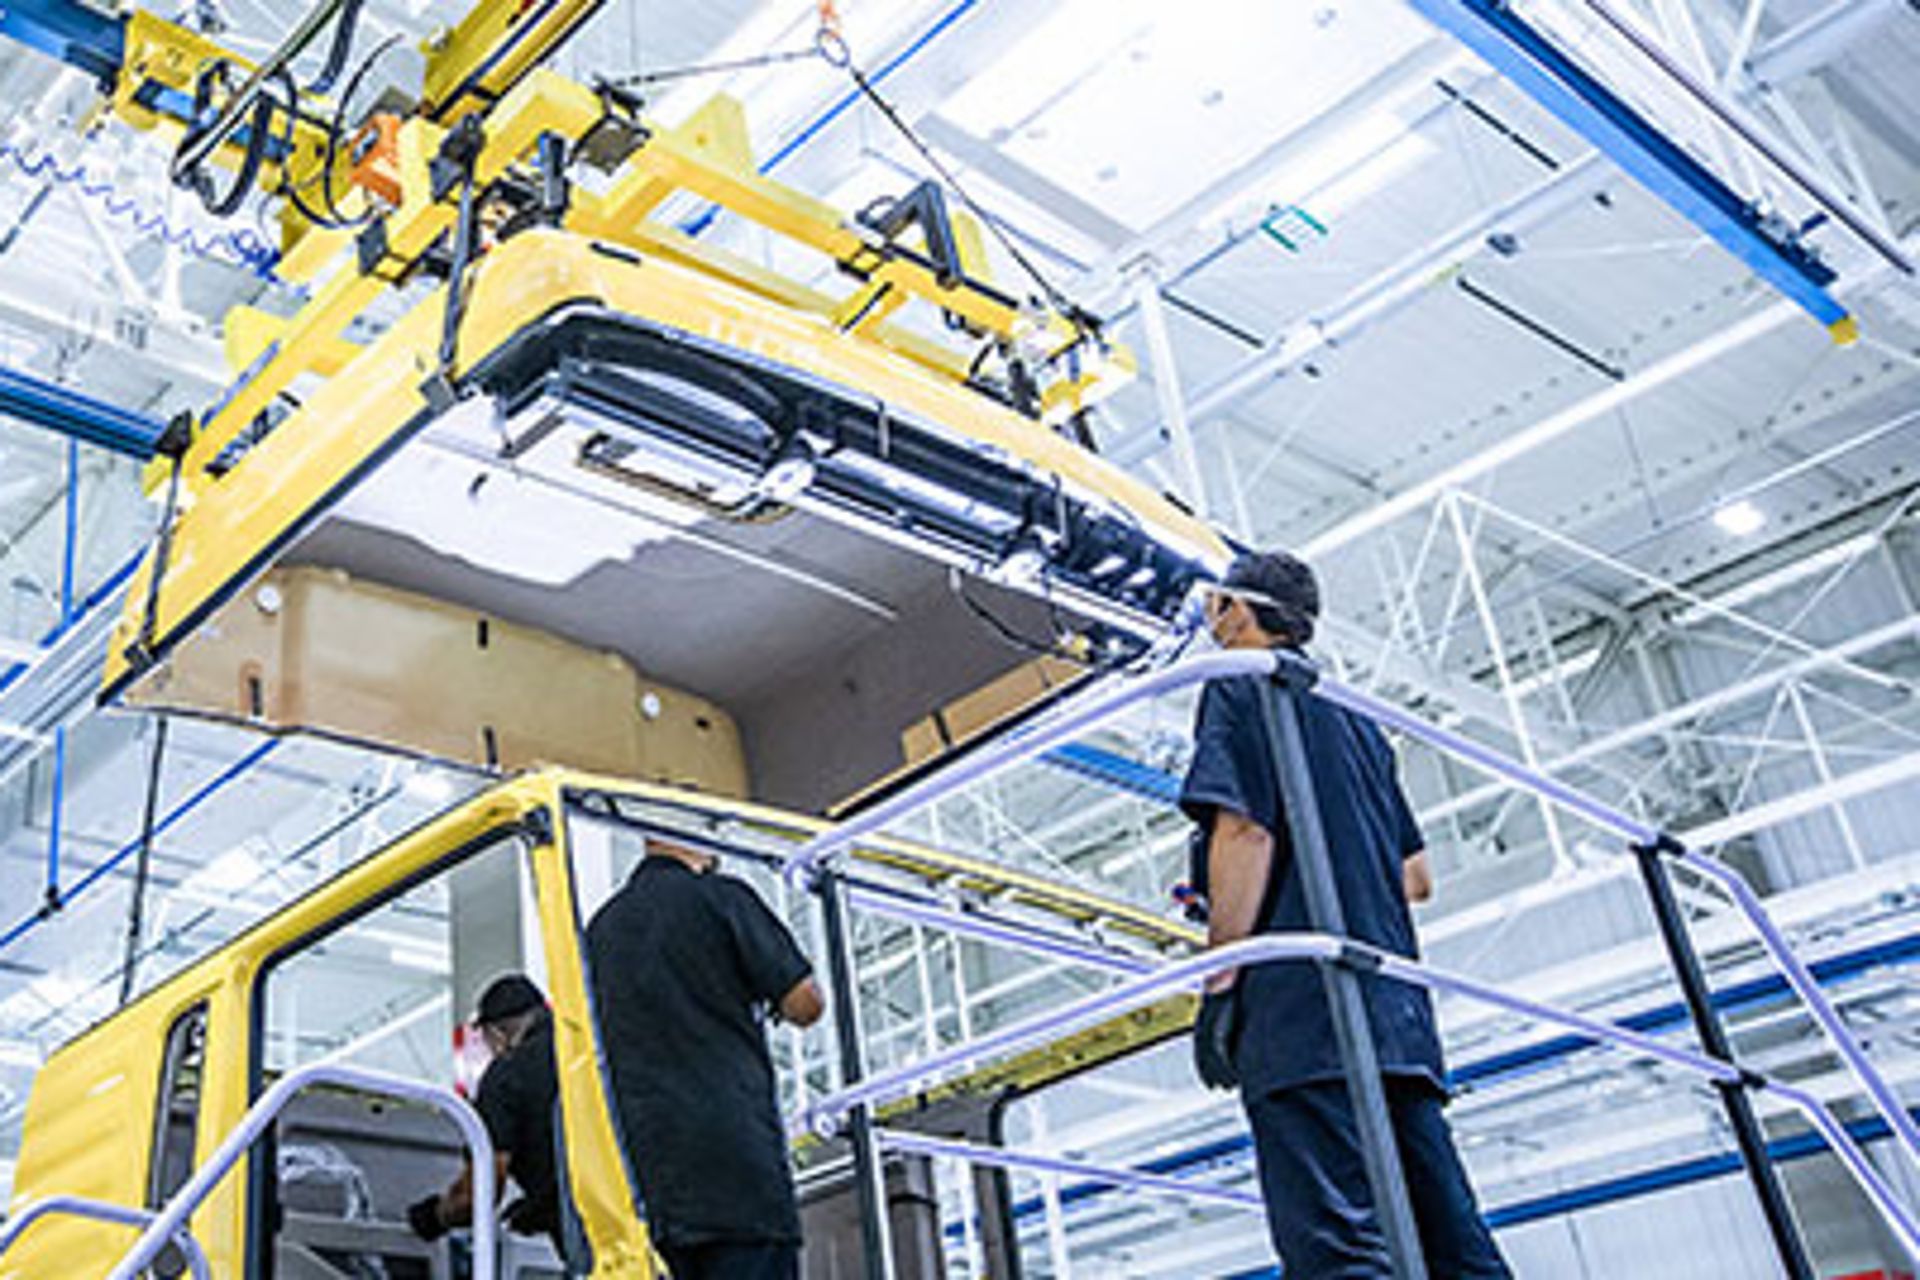 The TRATON brand Volkswagen Caminhões e Ônibus (VWCO) is building the Meteor truck series in a completely new digital manufacturing facility at the plant in Resende, Brazil. 
                 